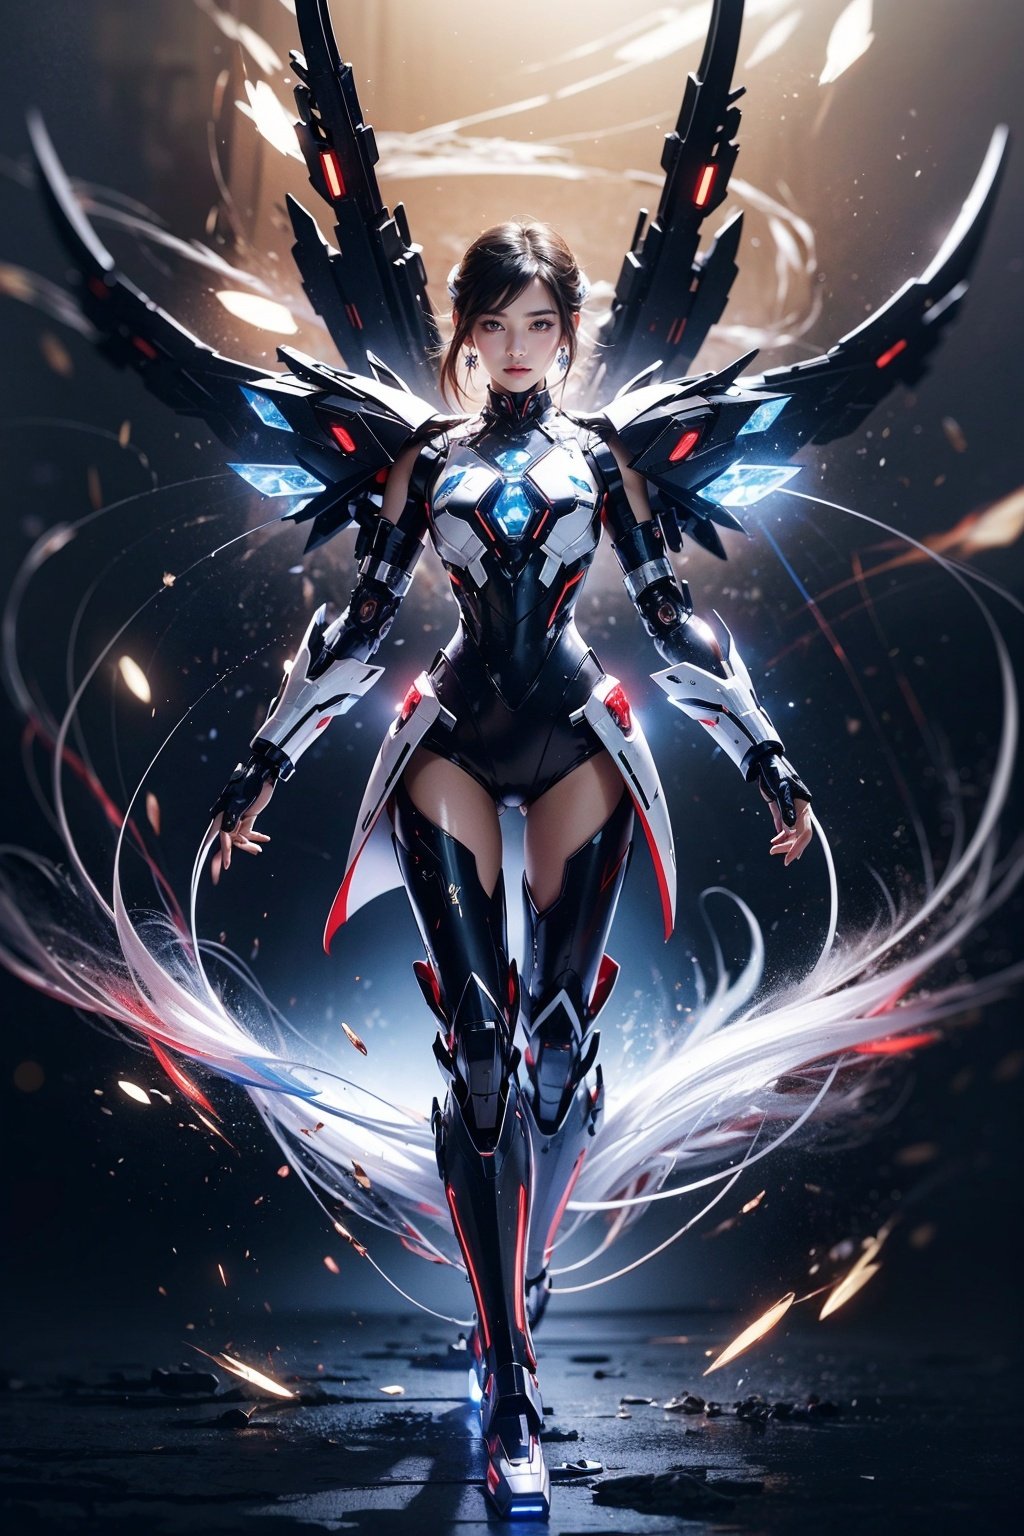 masterpiece,best quality,official art,highly realistic,1girl,full body mecha,folding fan,glass folding fan,delicate and lovely face,blue and red and white mecha,(glassy translucence:1.3),graceful poses,blink-and-you-miss-it detail,Sci-fi light effects,(Illuminated circuit board),,armor,flying hair,
